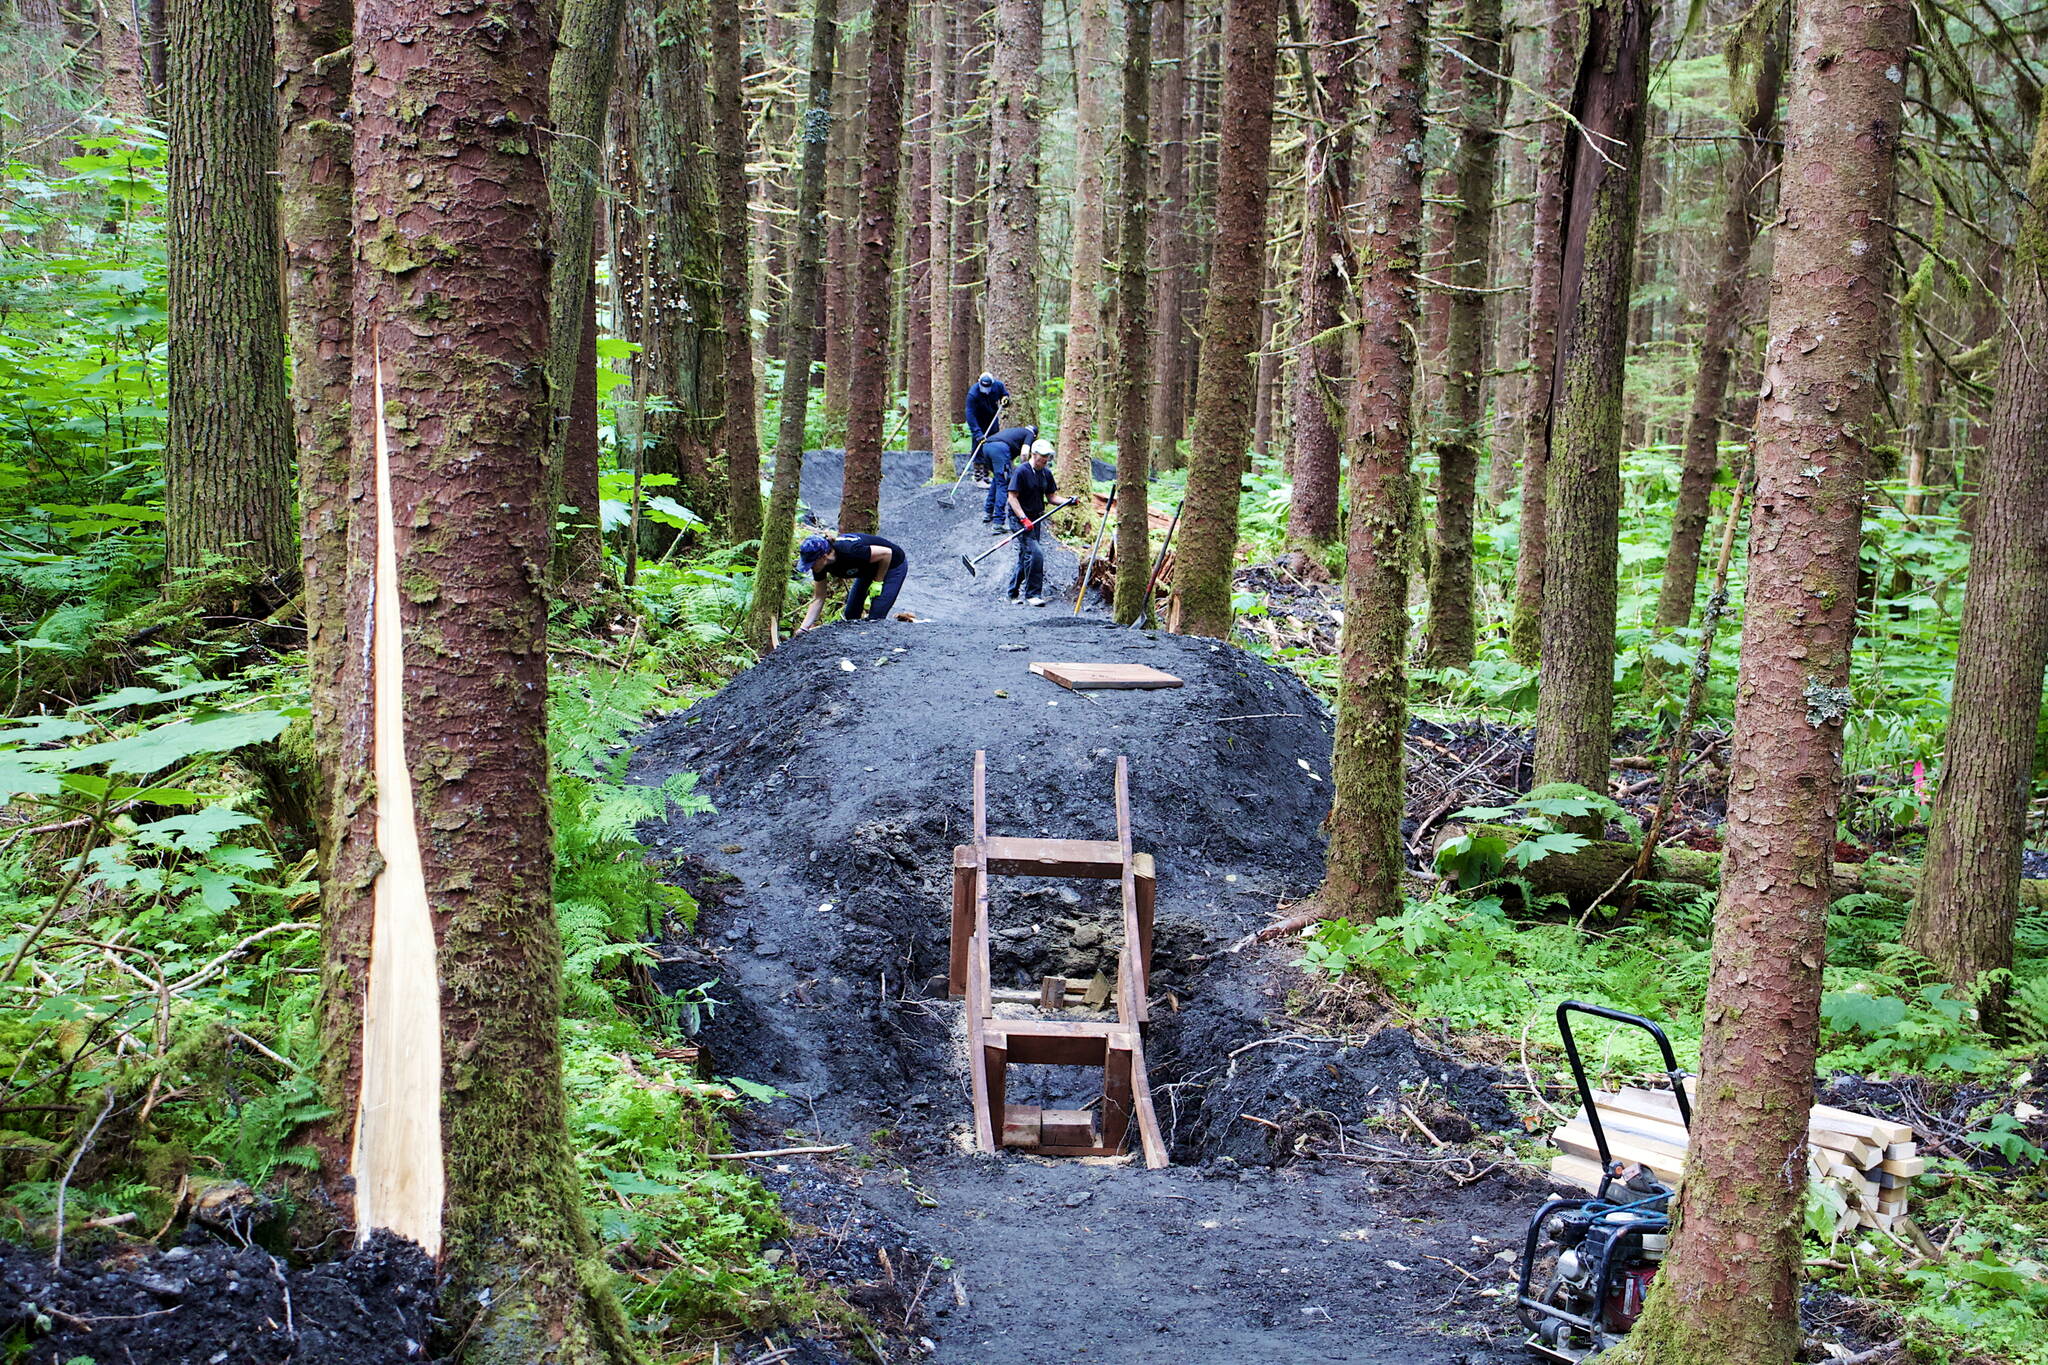 Volunteers pack down the surface of the intermediate-level trail at the soon-to-open Thunder Mountain Bike Park on Saturday. (Mark Sabbatini / Juneau Empire)